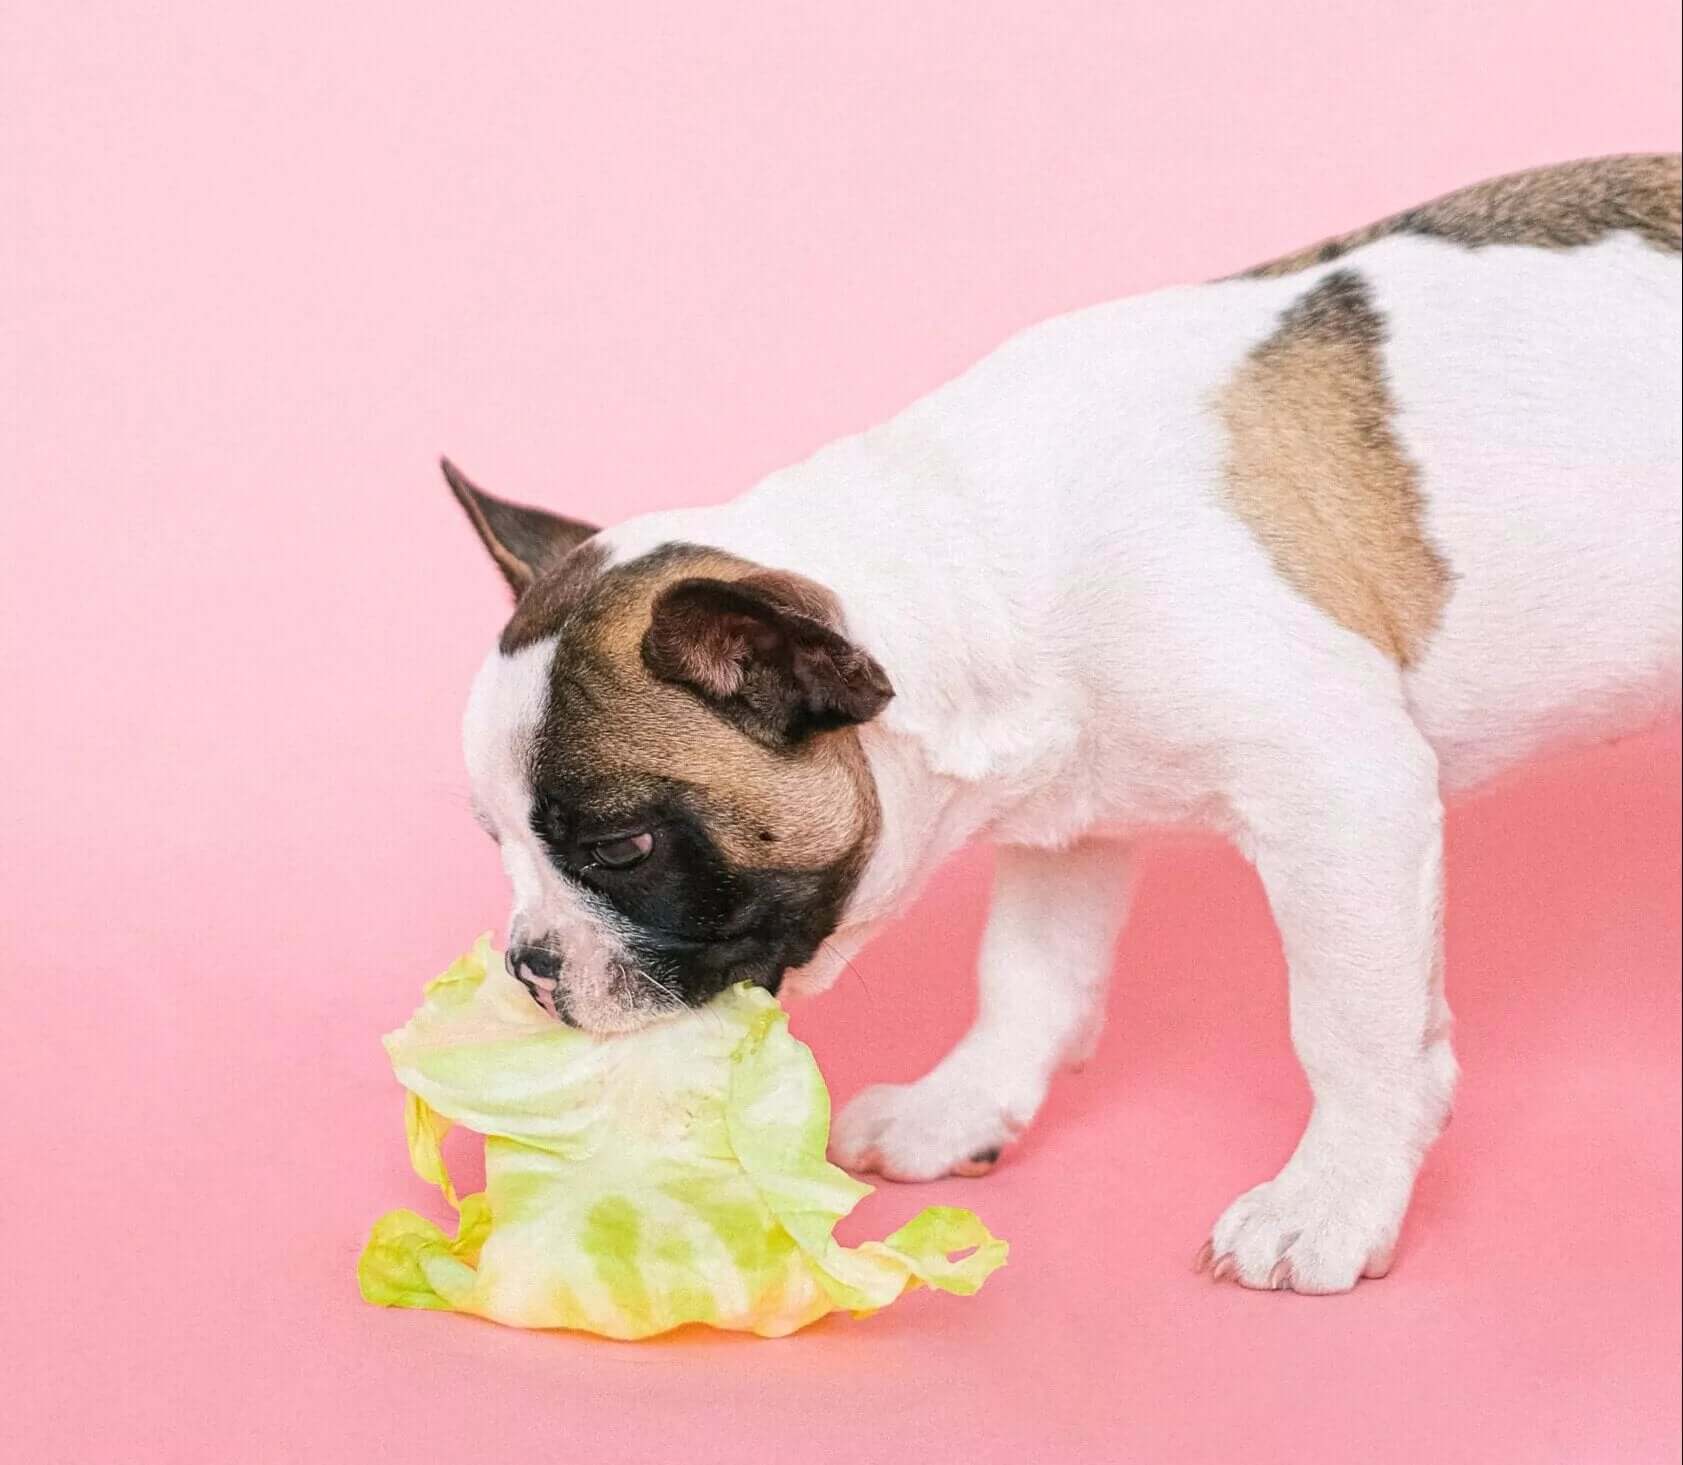 Is lettuce bad for dogs?